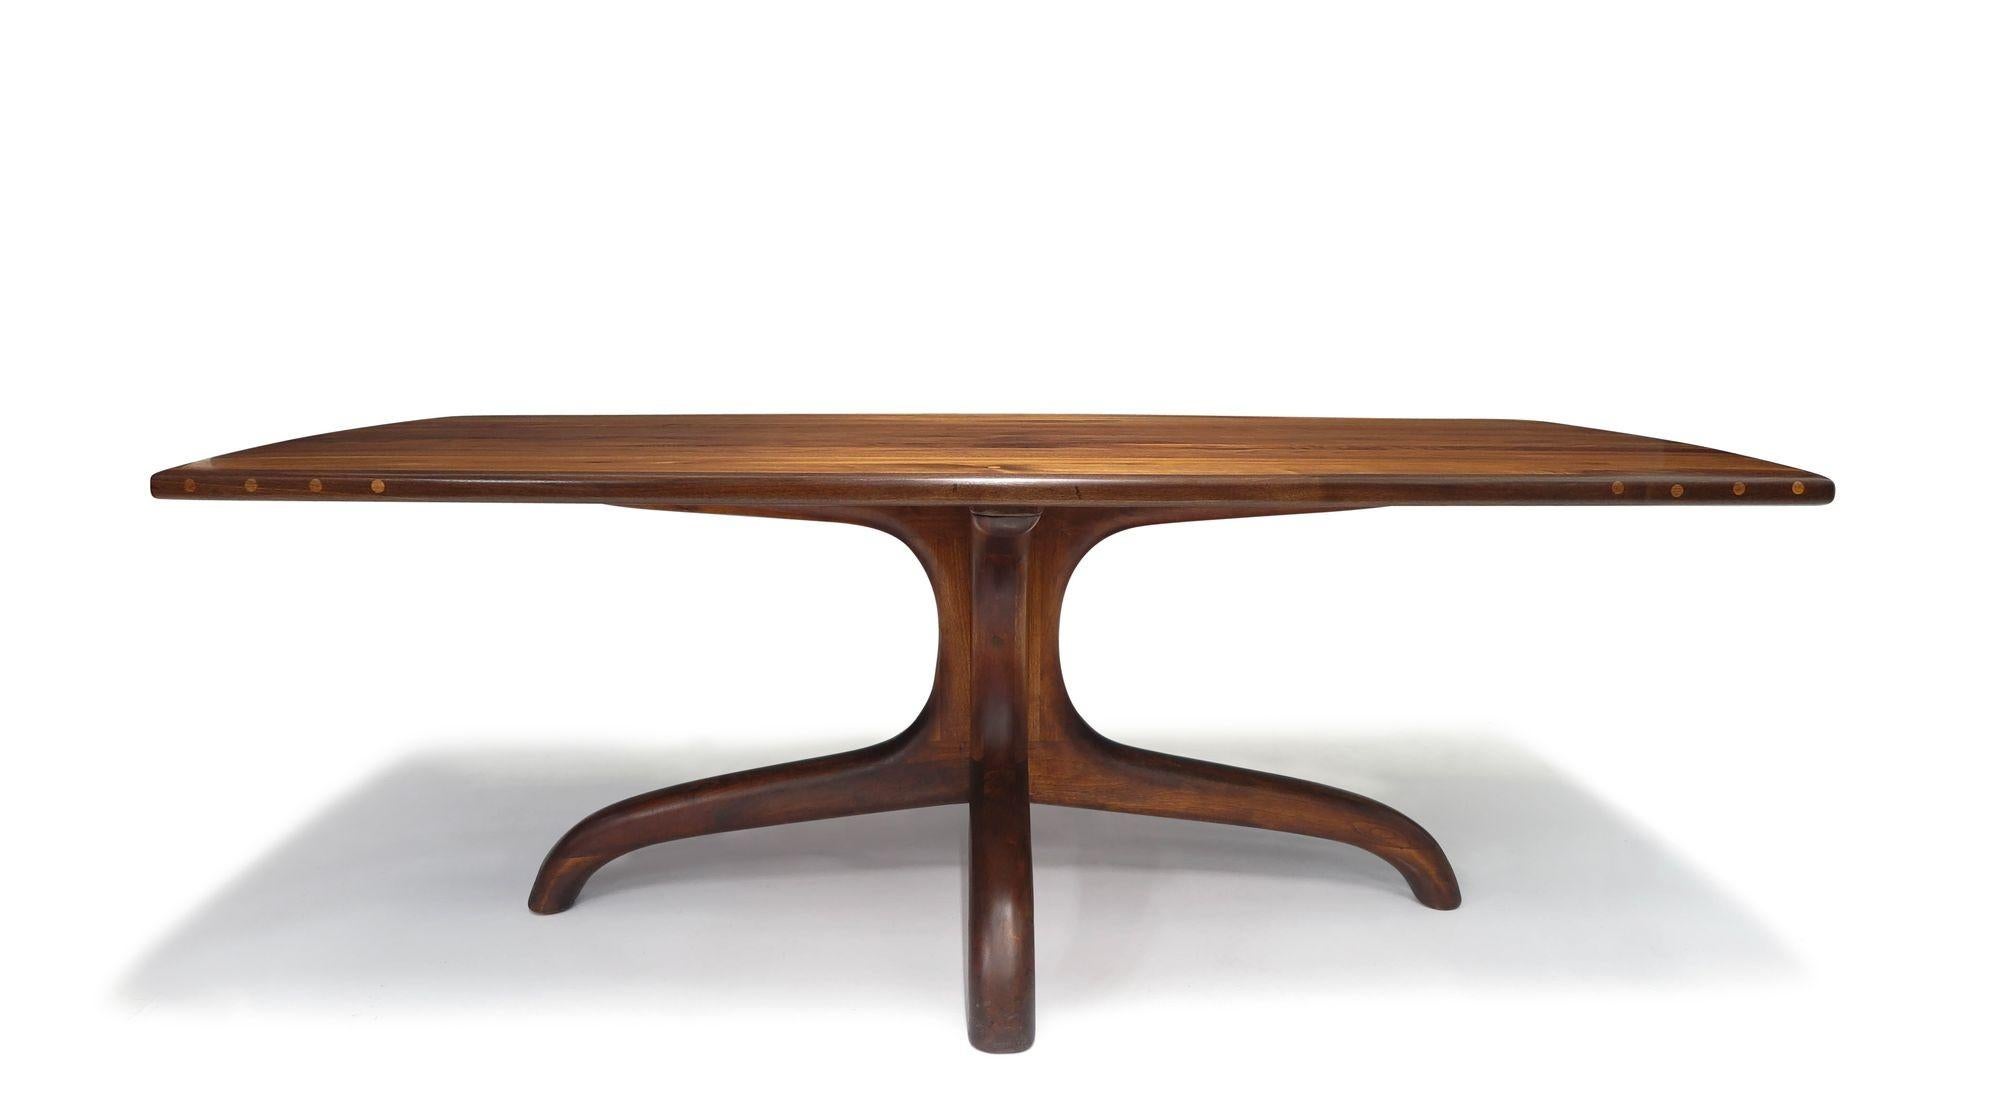 Arthur Espenet Carpenter Black Walnut Dining Table
This exquisite dining table is characterized by its long rectangular top with gently curved sides, accentuated by exposed joinery on the sides, Supported by a sculptural pedestal base, this table is